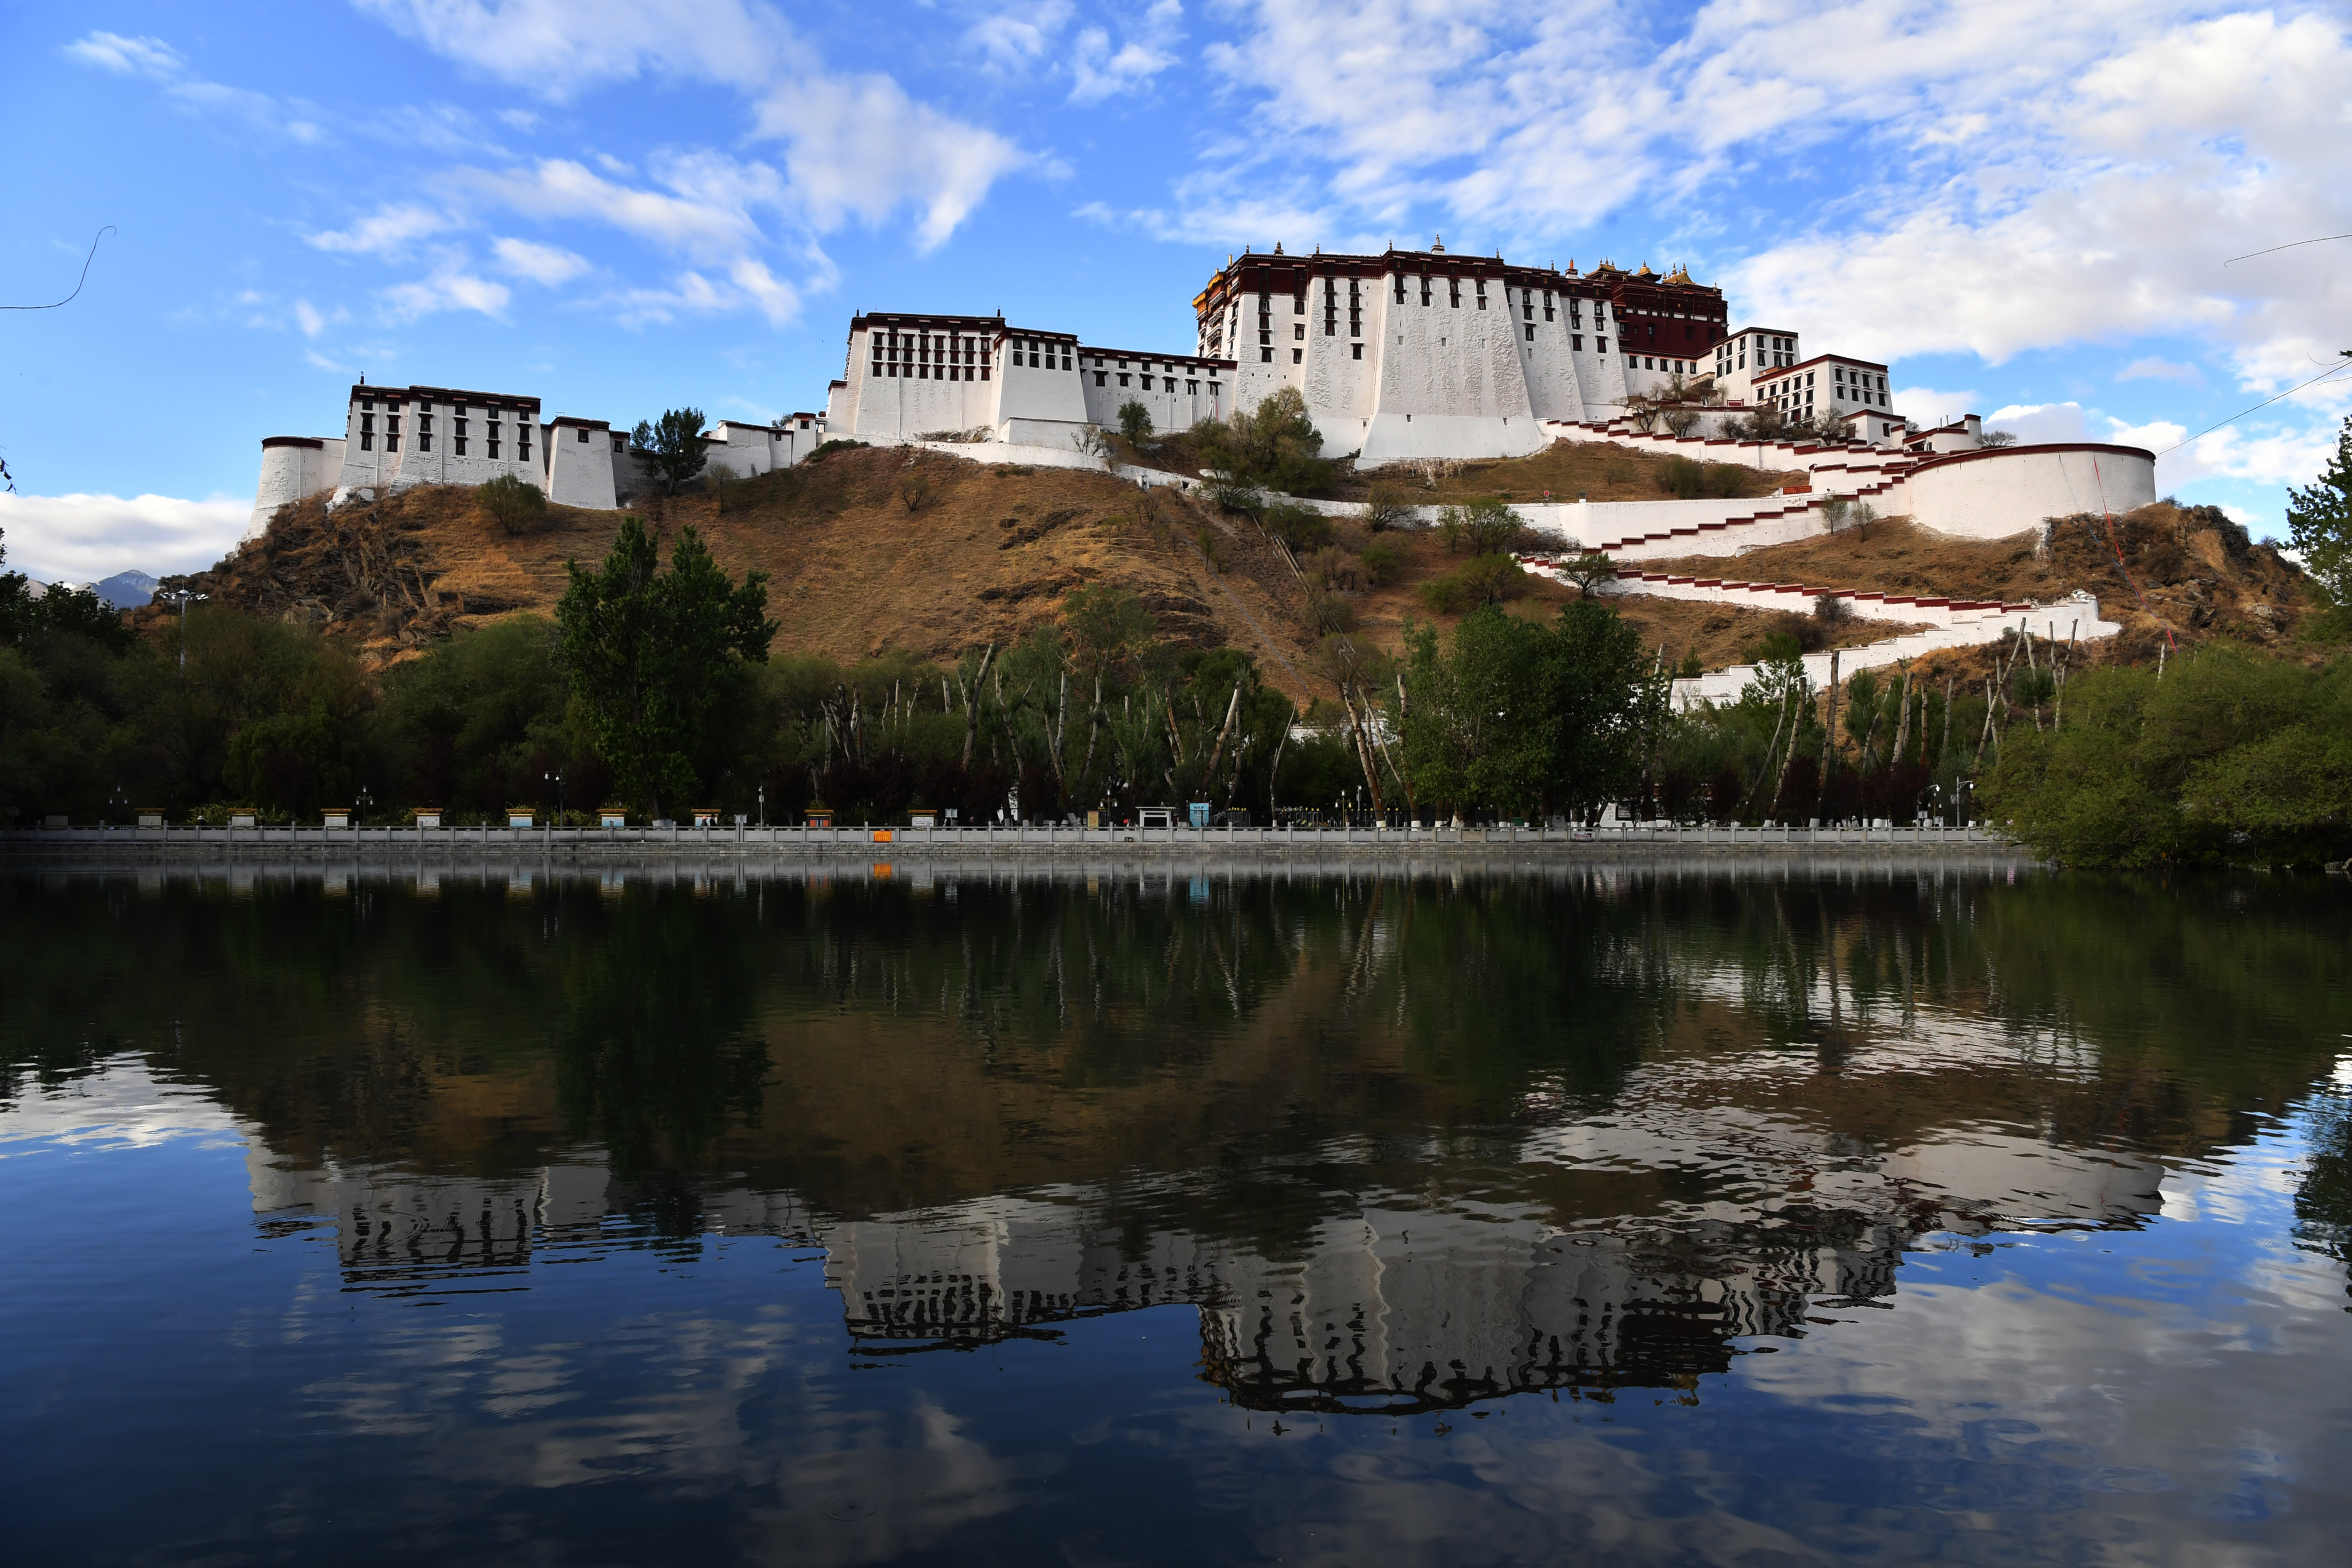 An order to overhaul the English translations of all product names and details referring to “Tibet” appeared in a notice issued by the e-commerce platform Weidian on Wednesday. Photo: Xinhua

